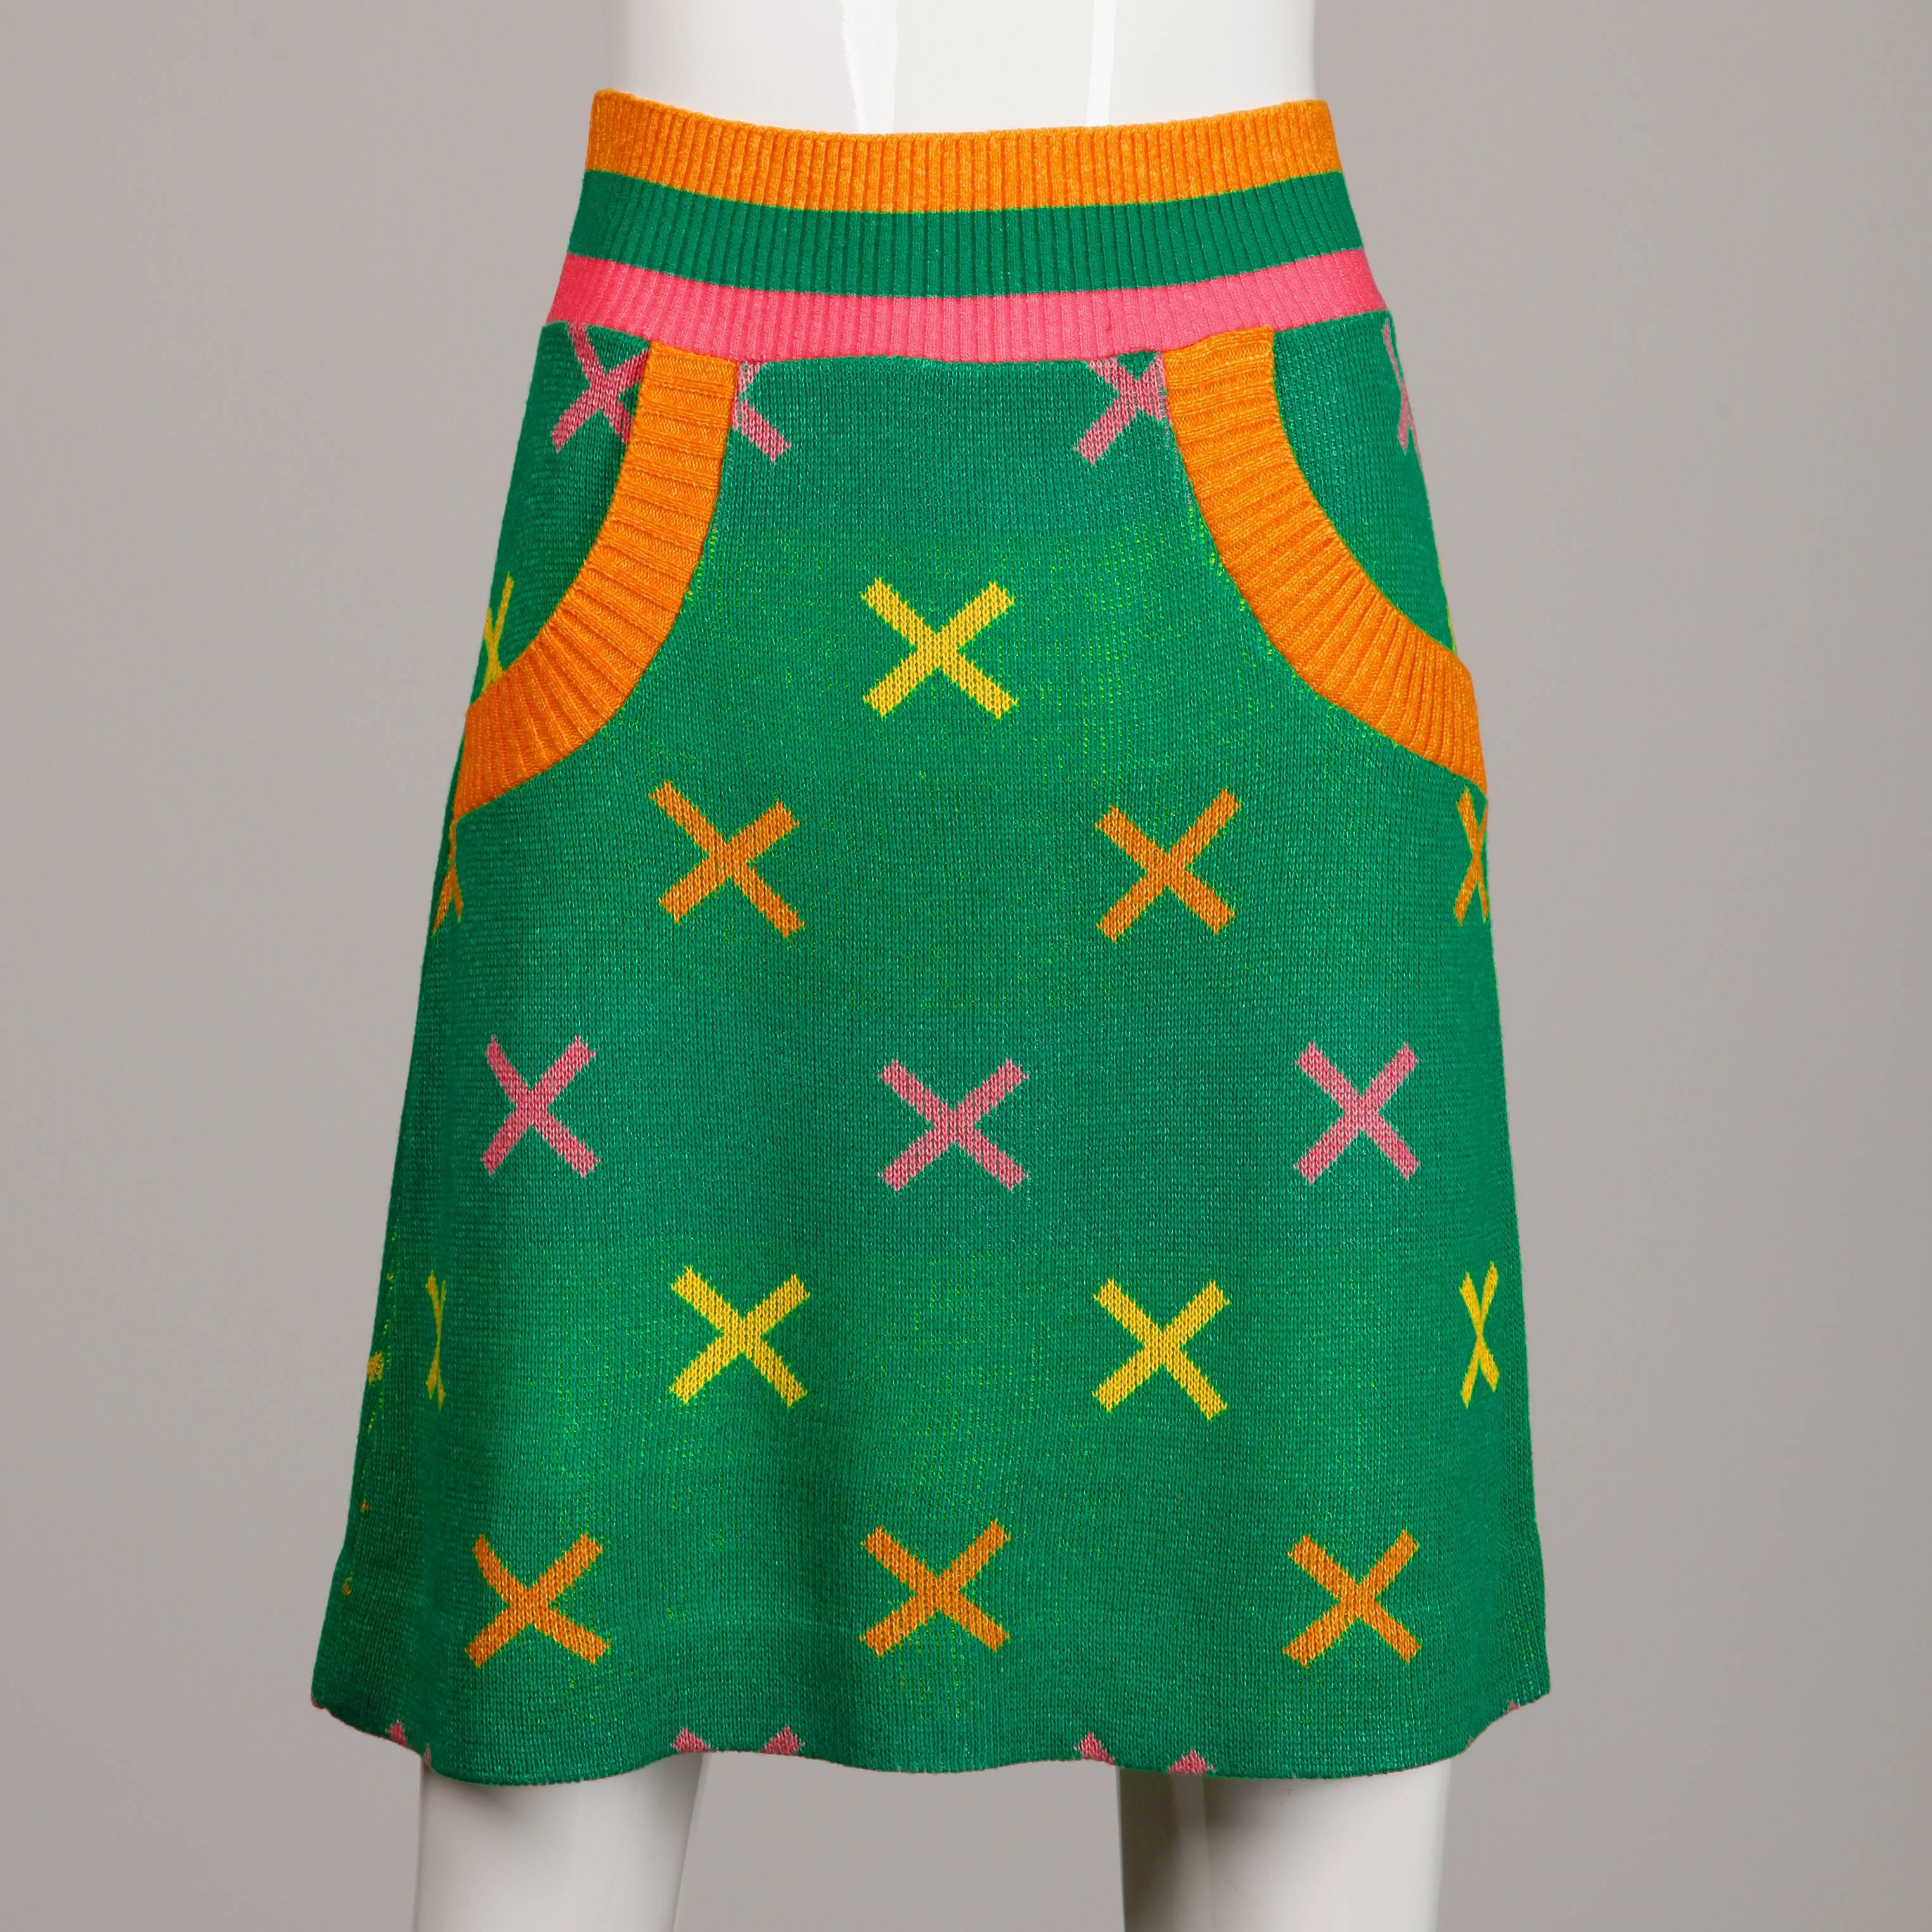 Two-piece knit sweater and skirt set by Giorgio Sant'Angelo from the 1970s featuring a bright colored "X" design. The size on this set is not marked, but it fits like a modern size small. On the top the bust measures 32"-36",